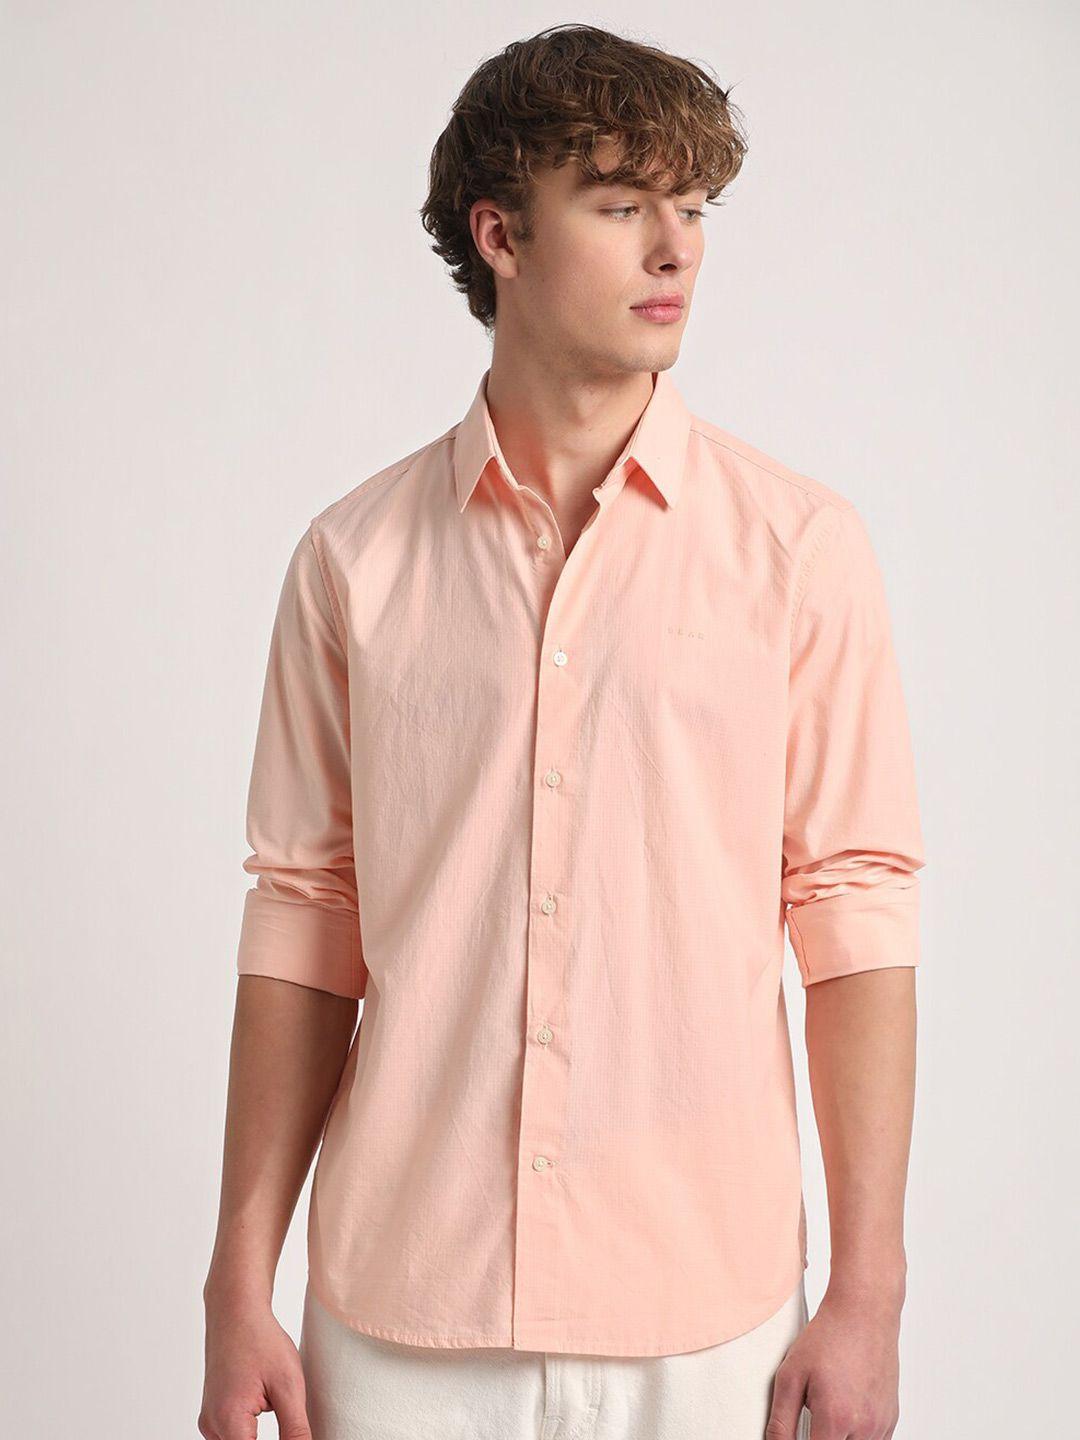 the-bear-house-slim-fit-pure-cotton-casual-shirt